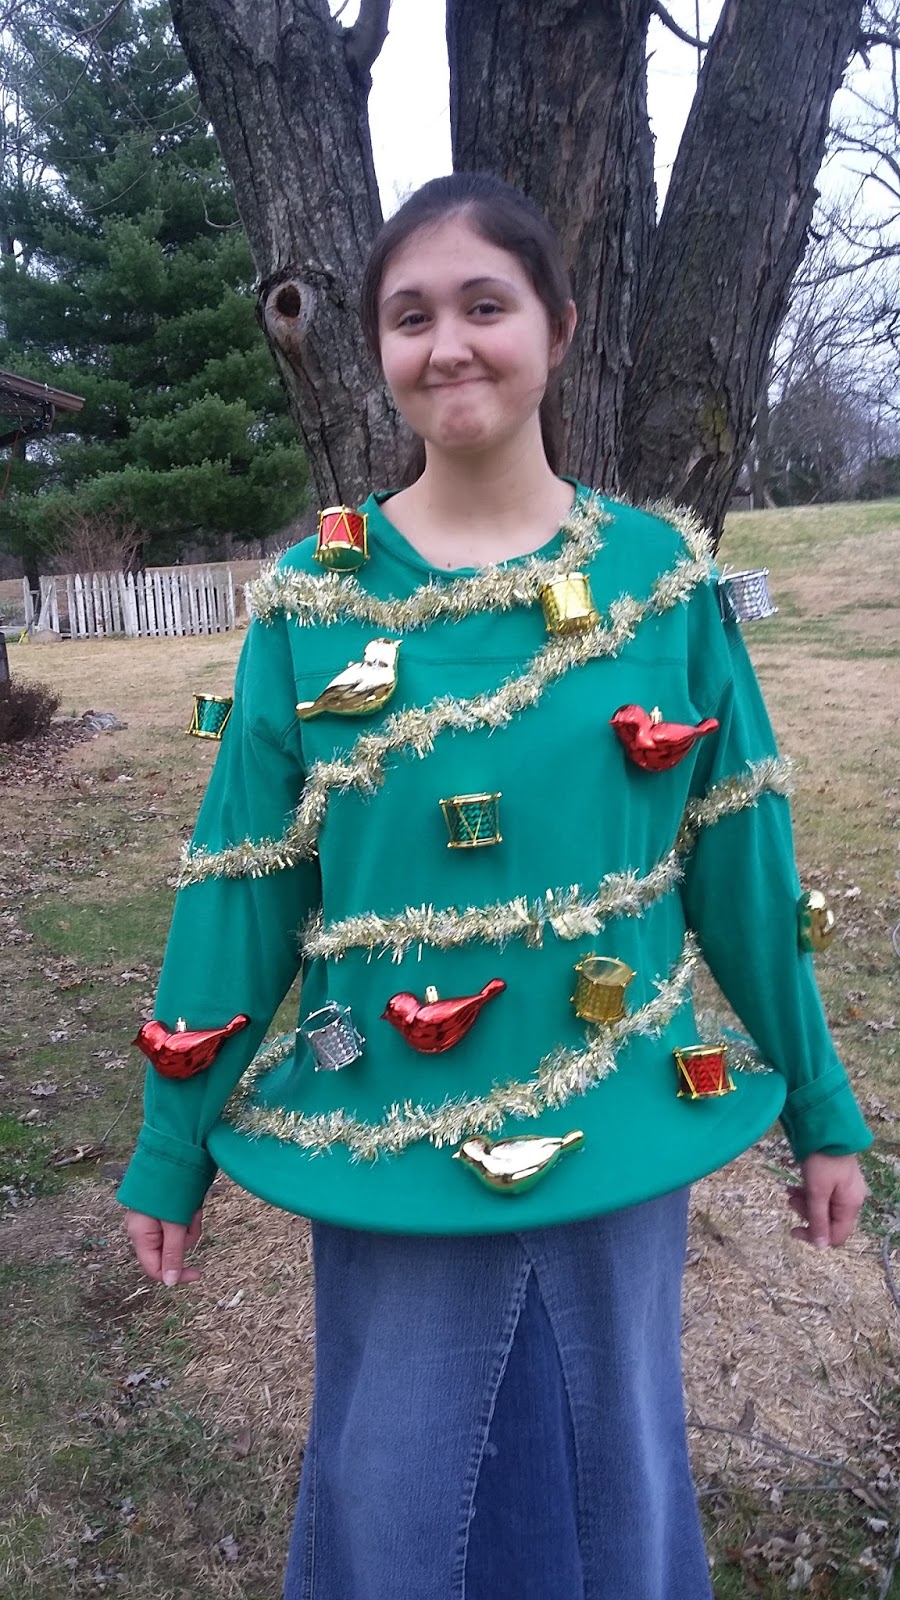 Dots & Daisies: Make Your Own Ugly Christmas Sweater